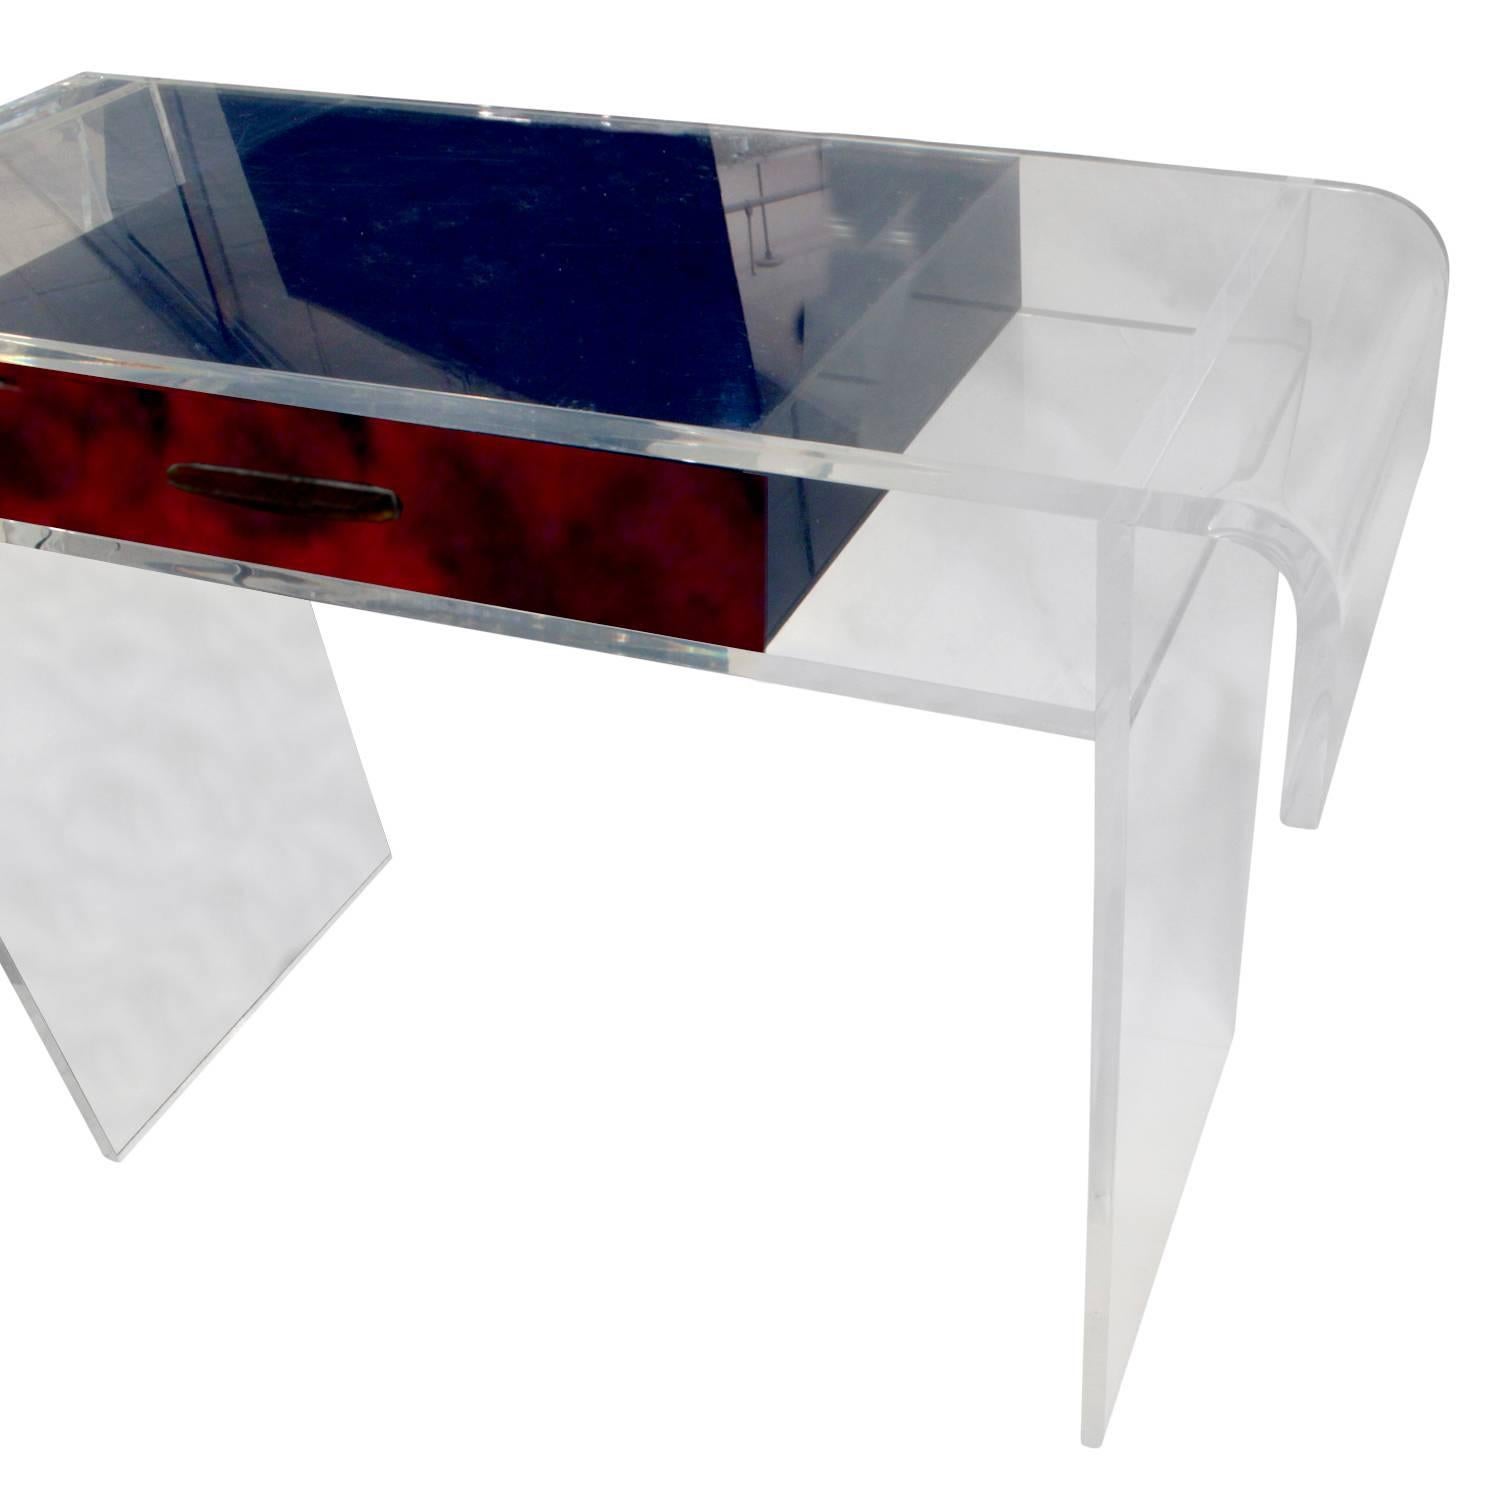 American Custom Lucite Vanity with Tortishell Lucite Drawer and Chair, 1970s